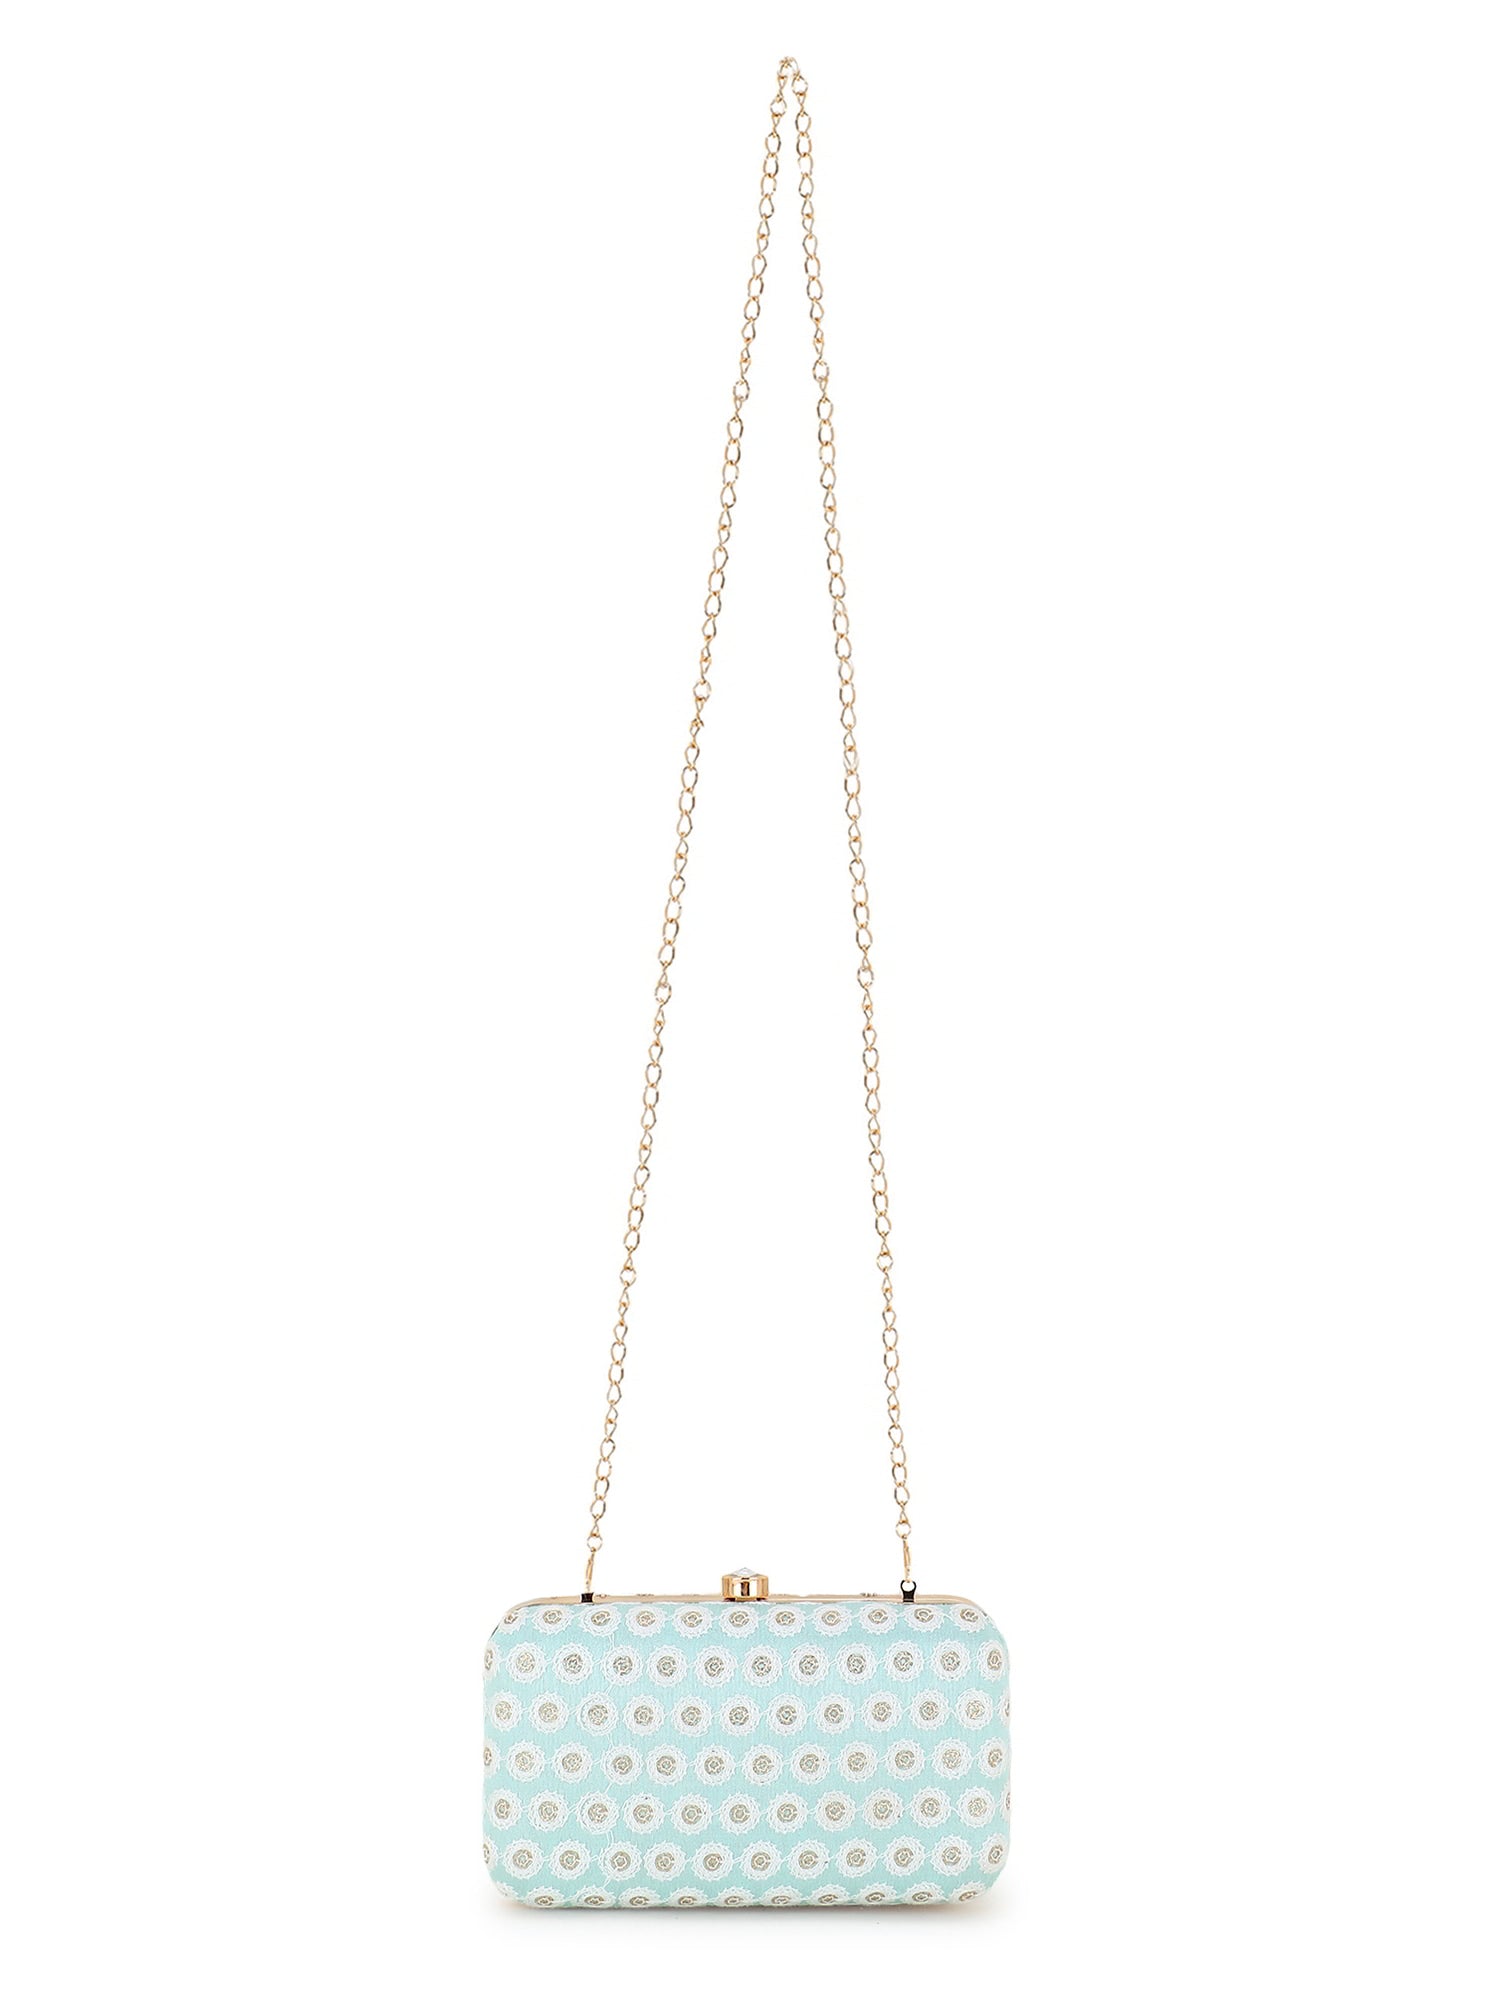 Hue Faux Silk Polka Dot Embroidered Clutch